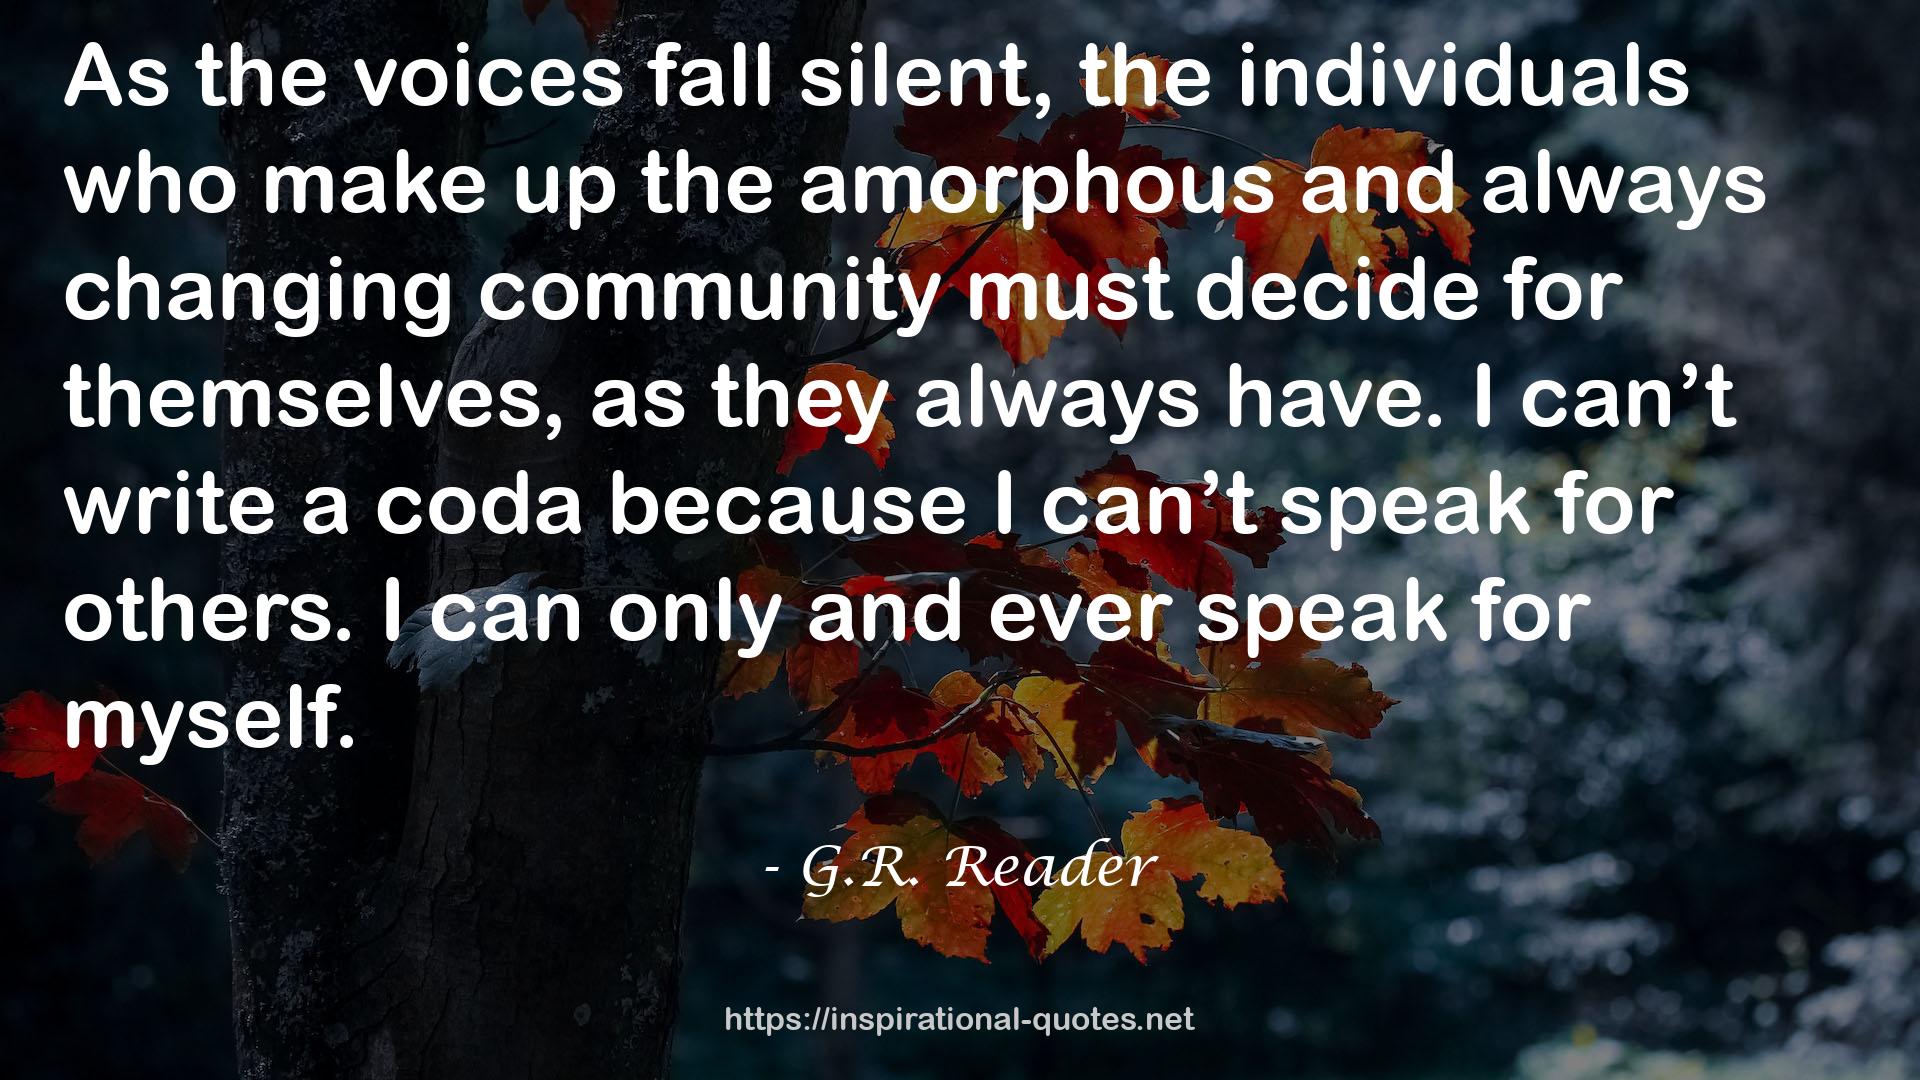 G.R. Reader QUOTES